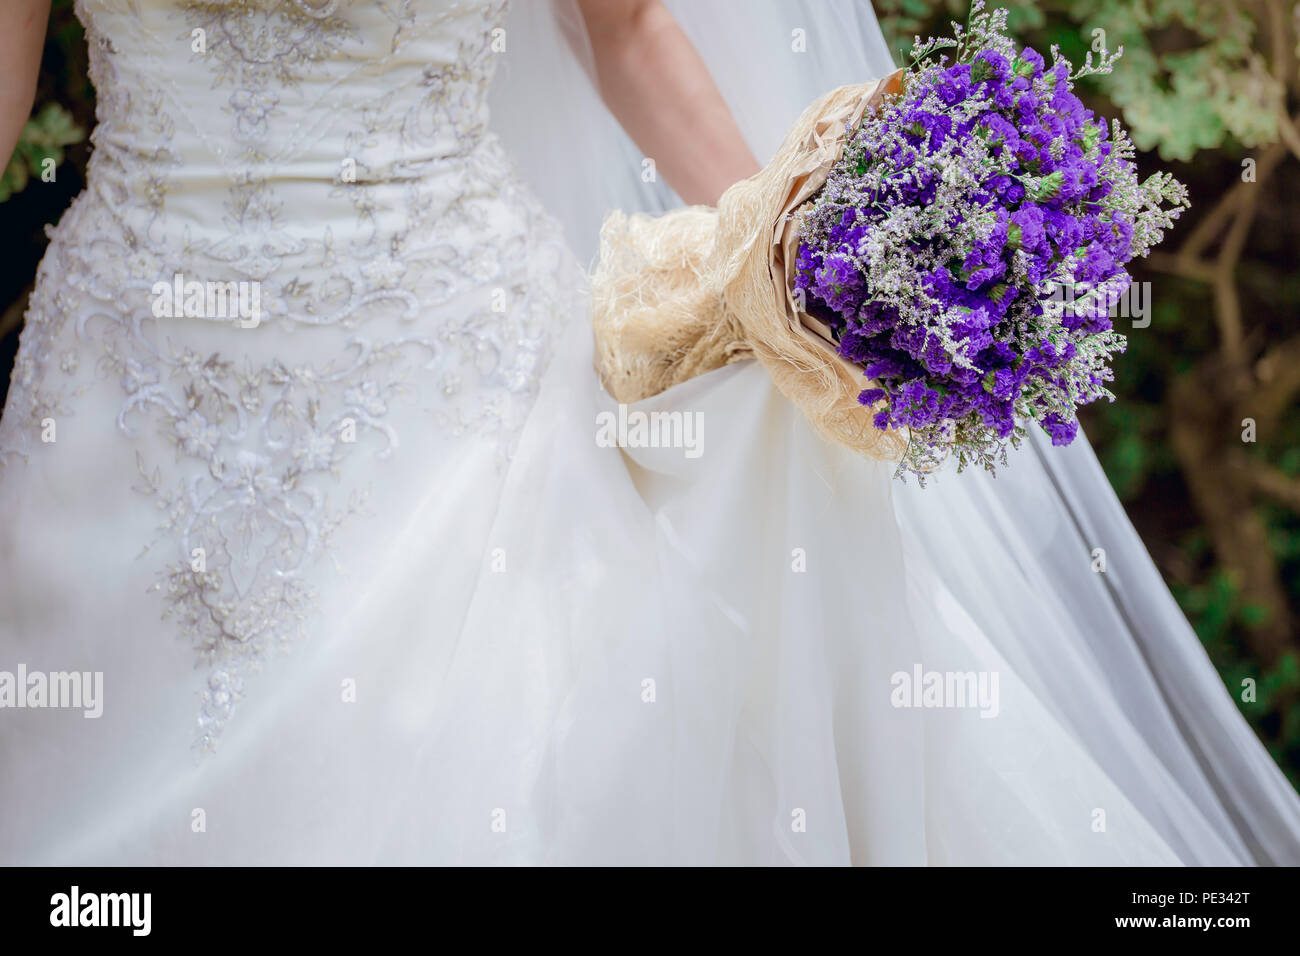 Newlyweds with a bouquet of beautiful flowers is the symbol of love and marriage. Stock Photo